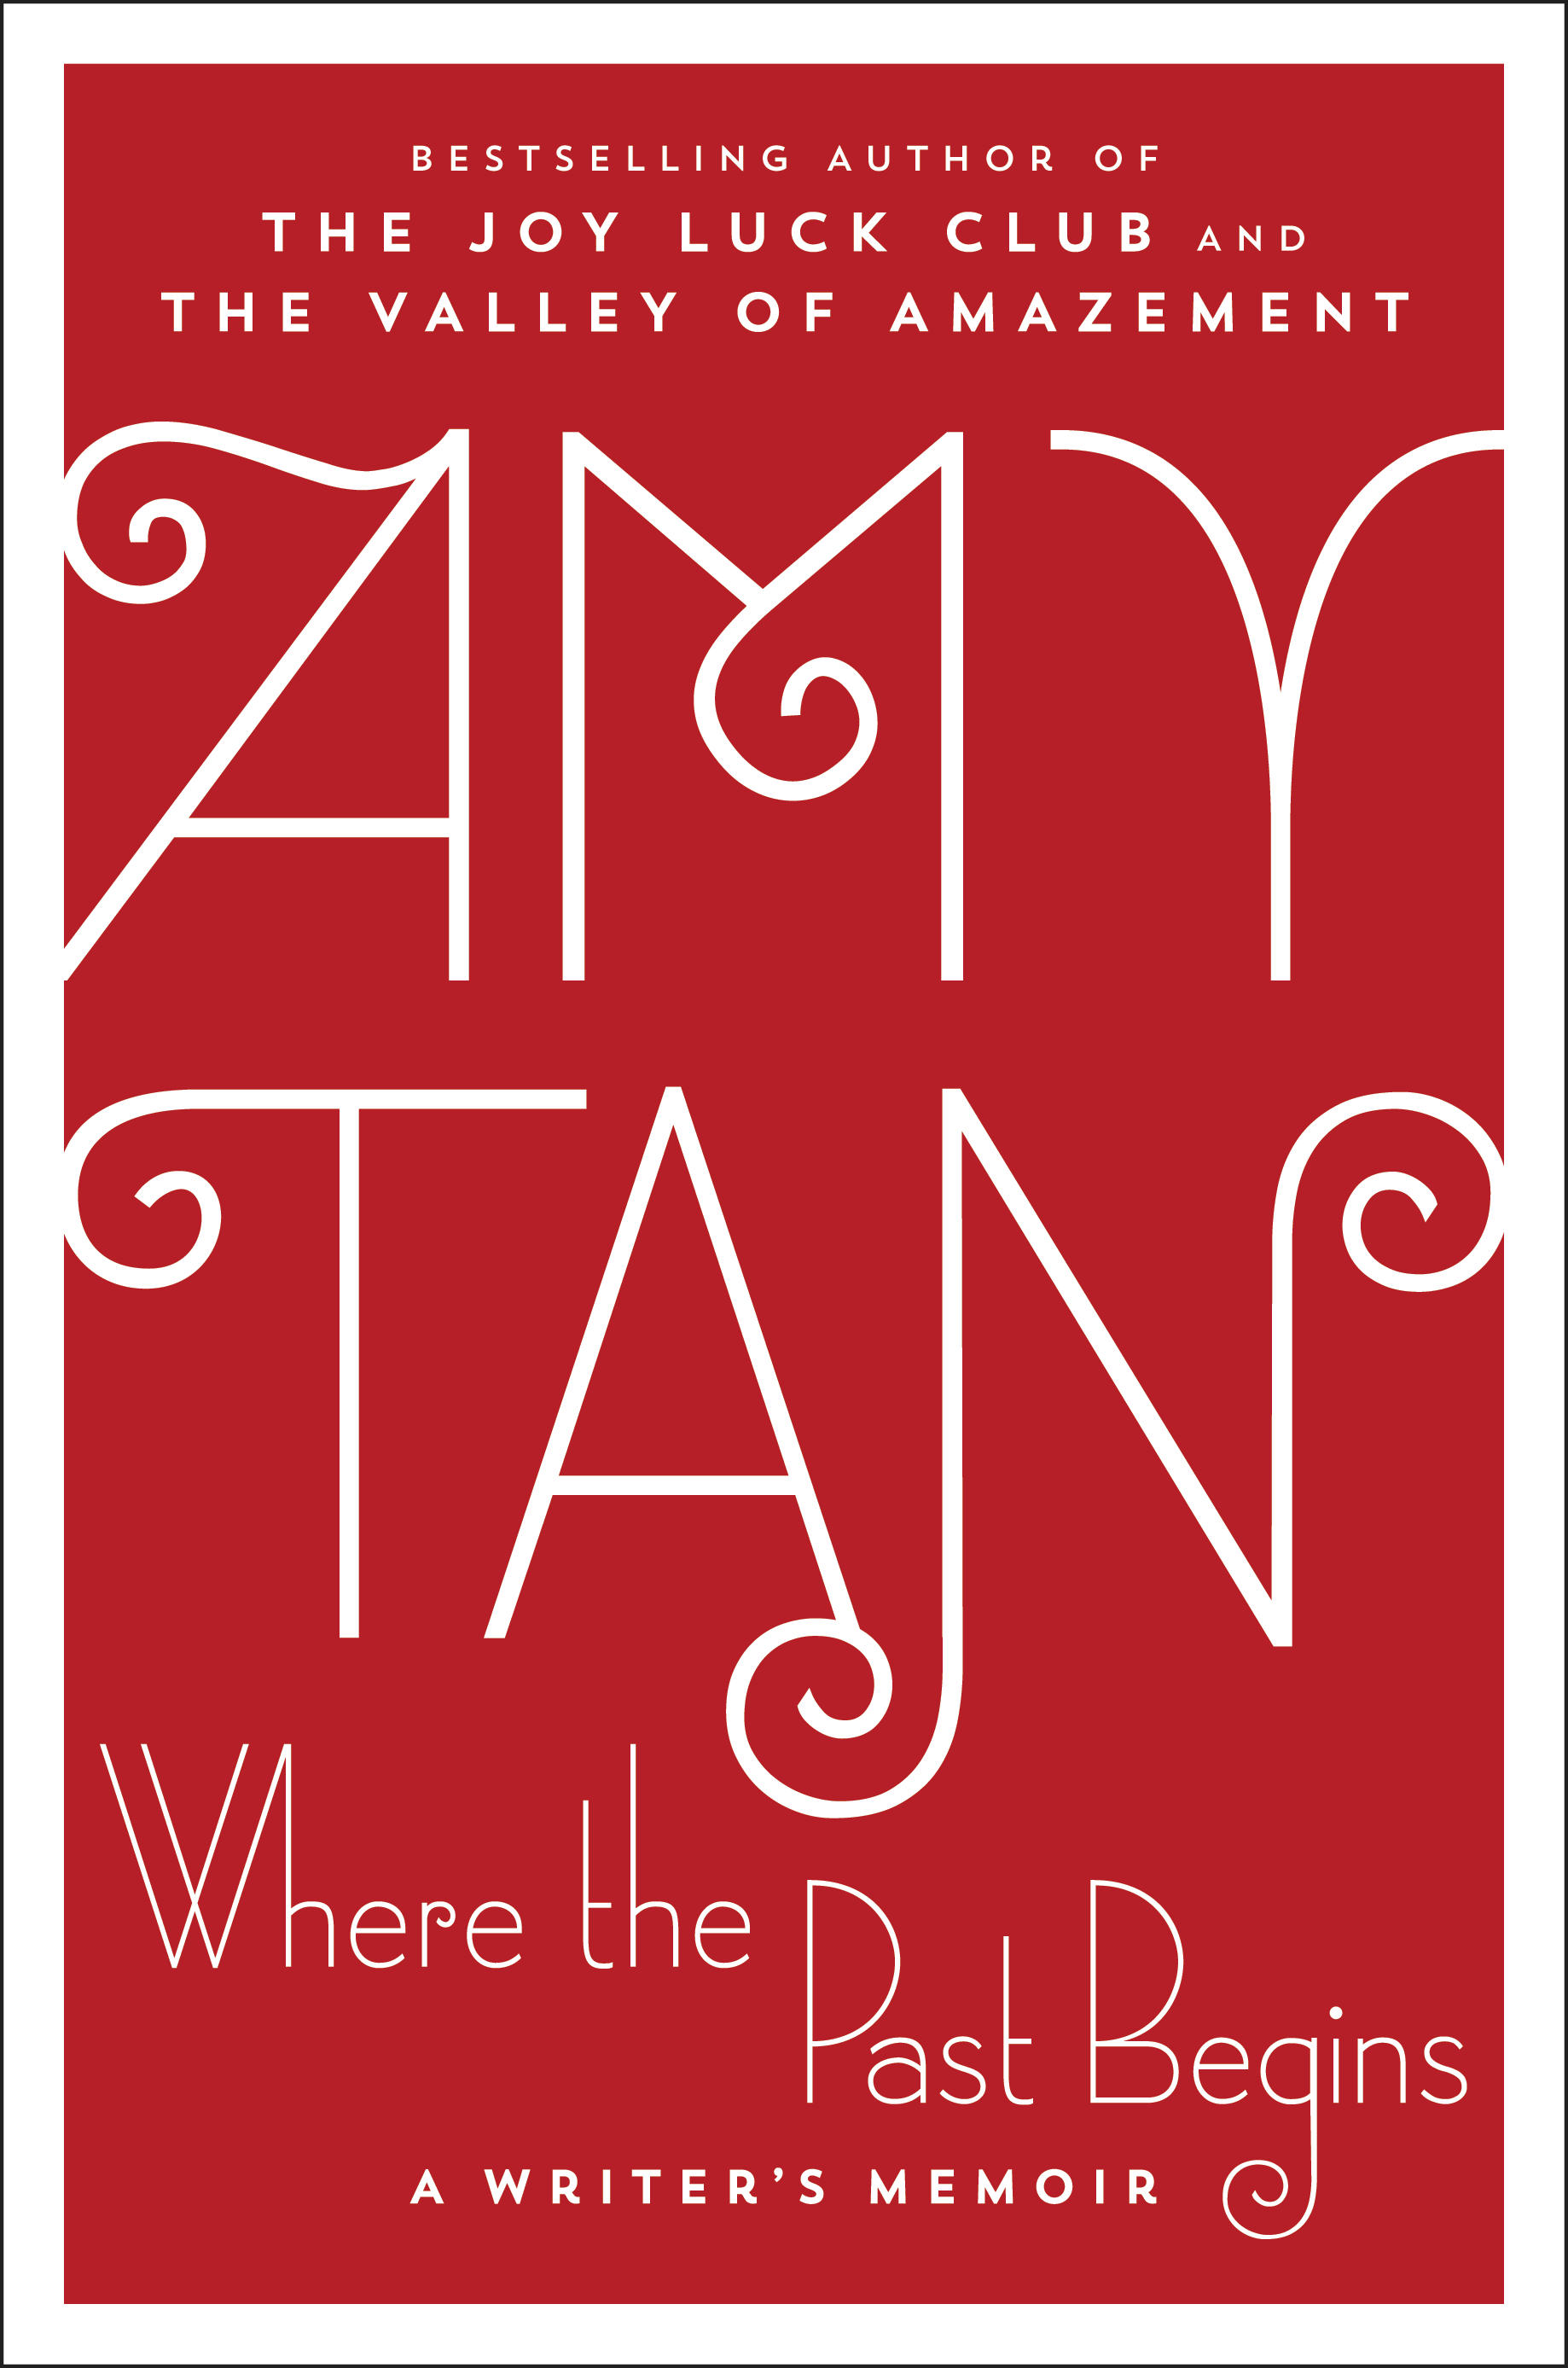 In her new 'writer's memoir' Amy Tan mines the past for instruction